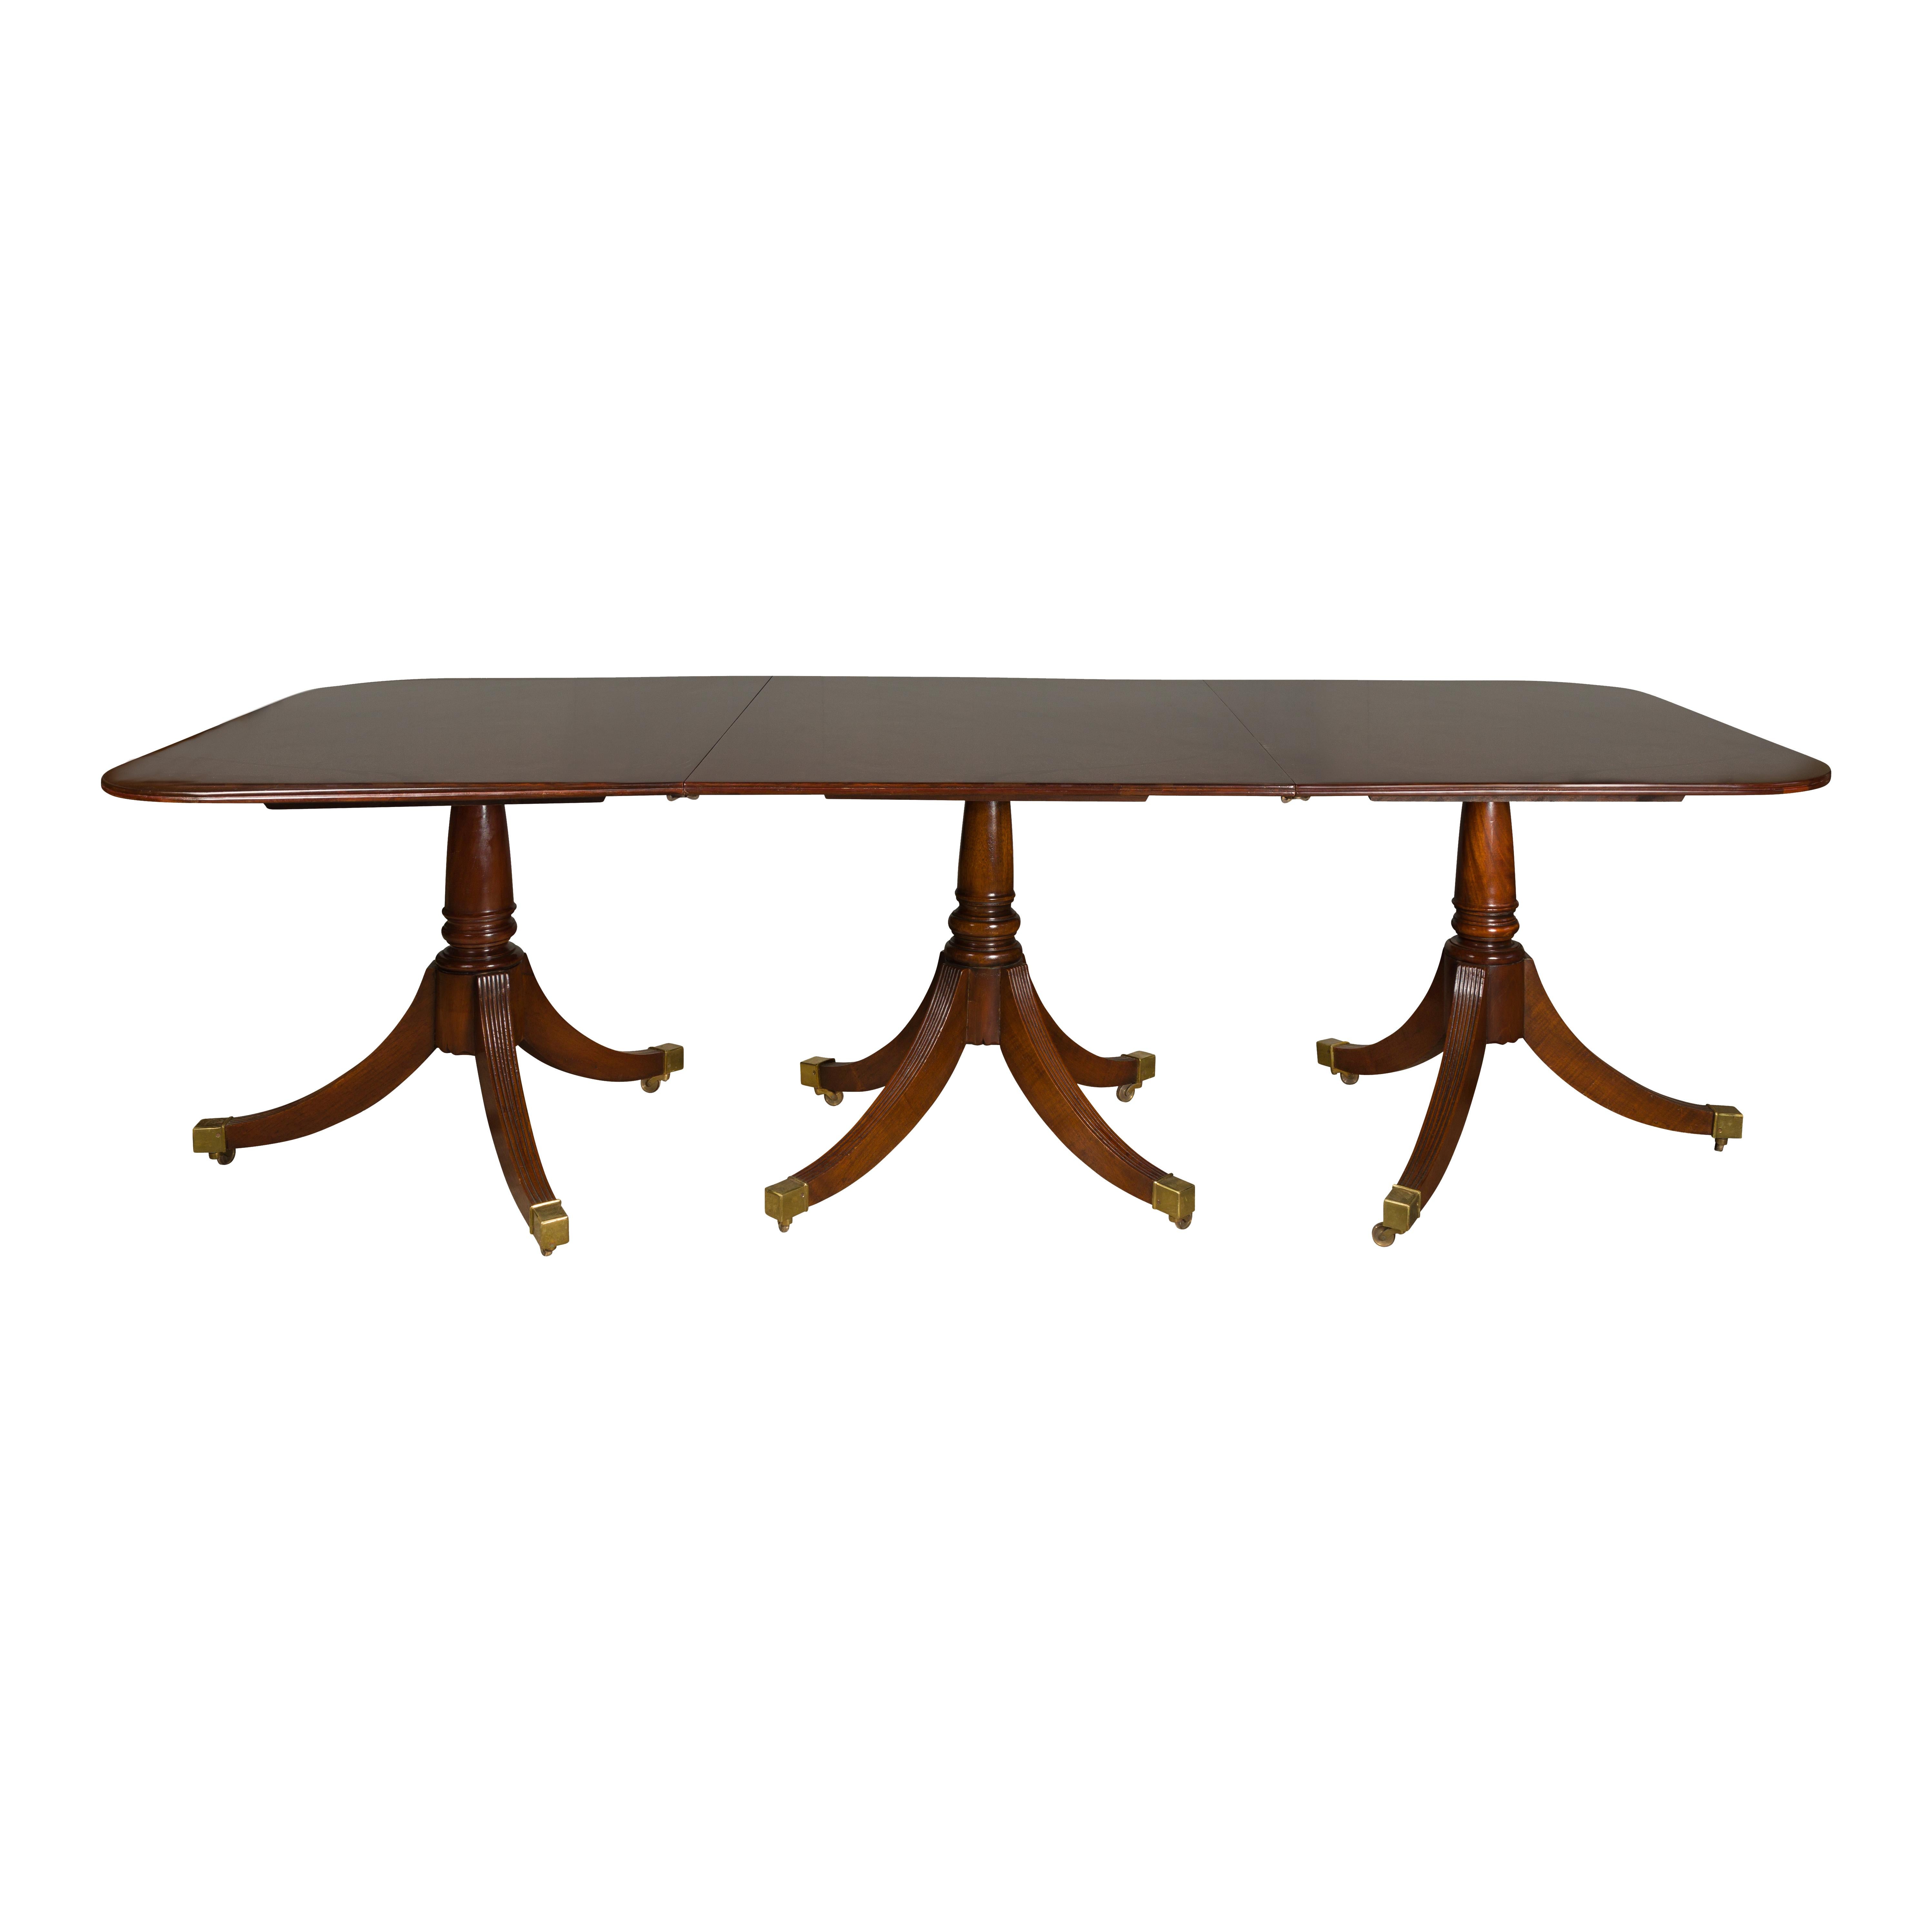 English Turn of the Century Mahogany Extension Dining Table with Quadripod Base For Sale 10